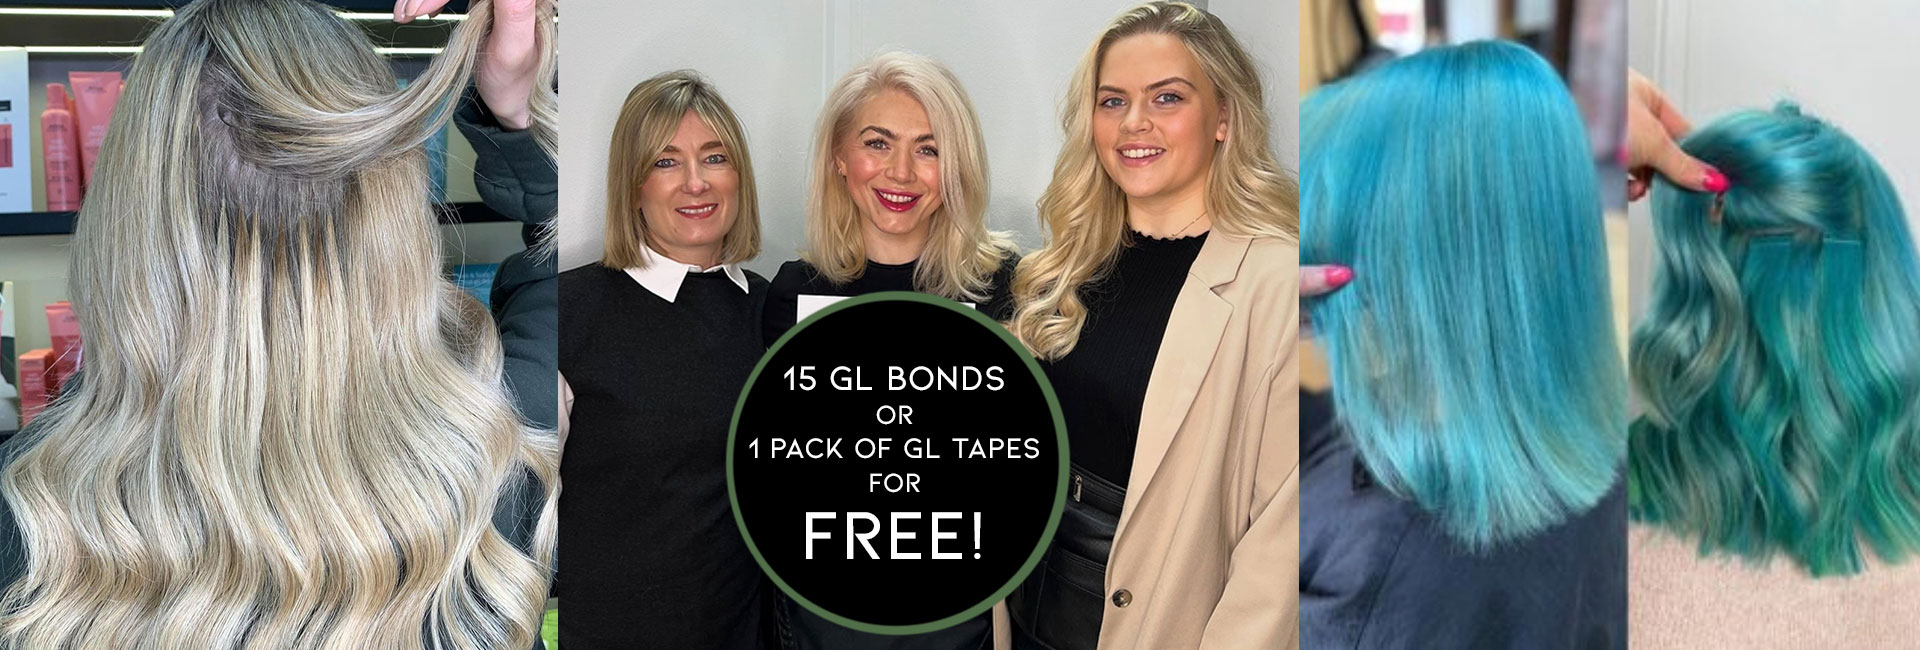 15 GL Bonds or 1 pack of GL Tapes for FREE! At Melanie Richards Beauty Salon In Peterborough 1S AT MELANIE RICHARD'S AWARD WINNING HAIR AND BEAUTY SALON IN PETERBOROUGH